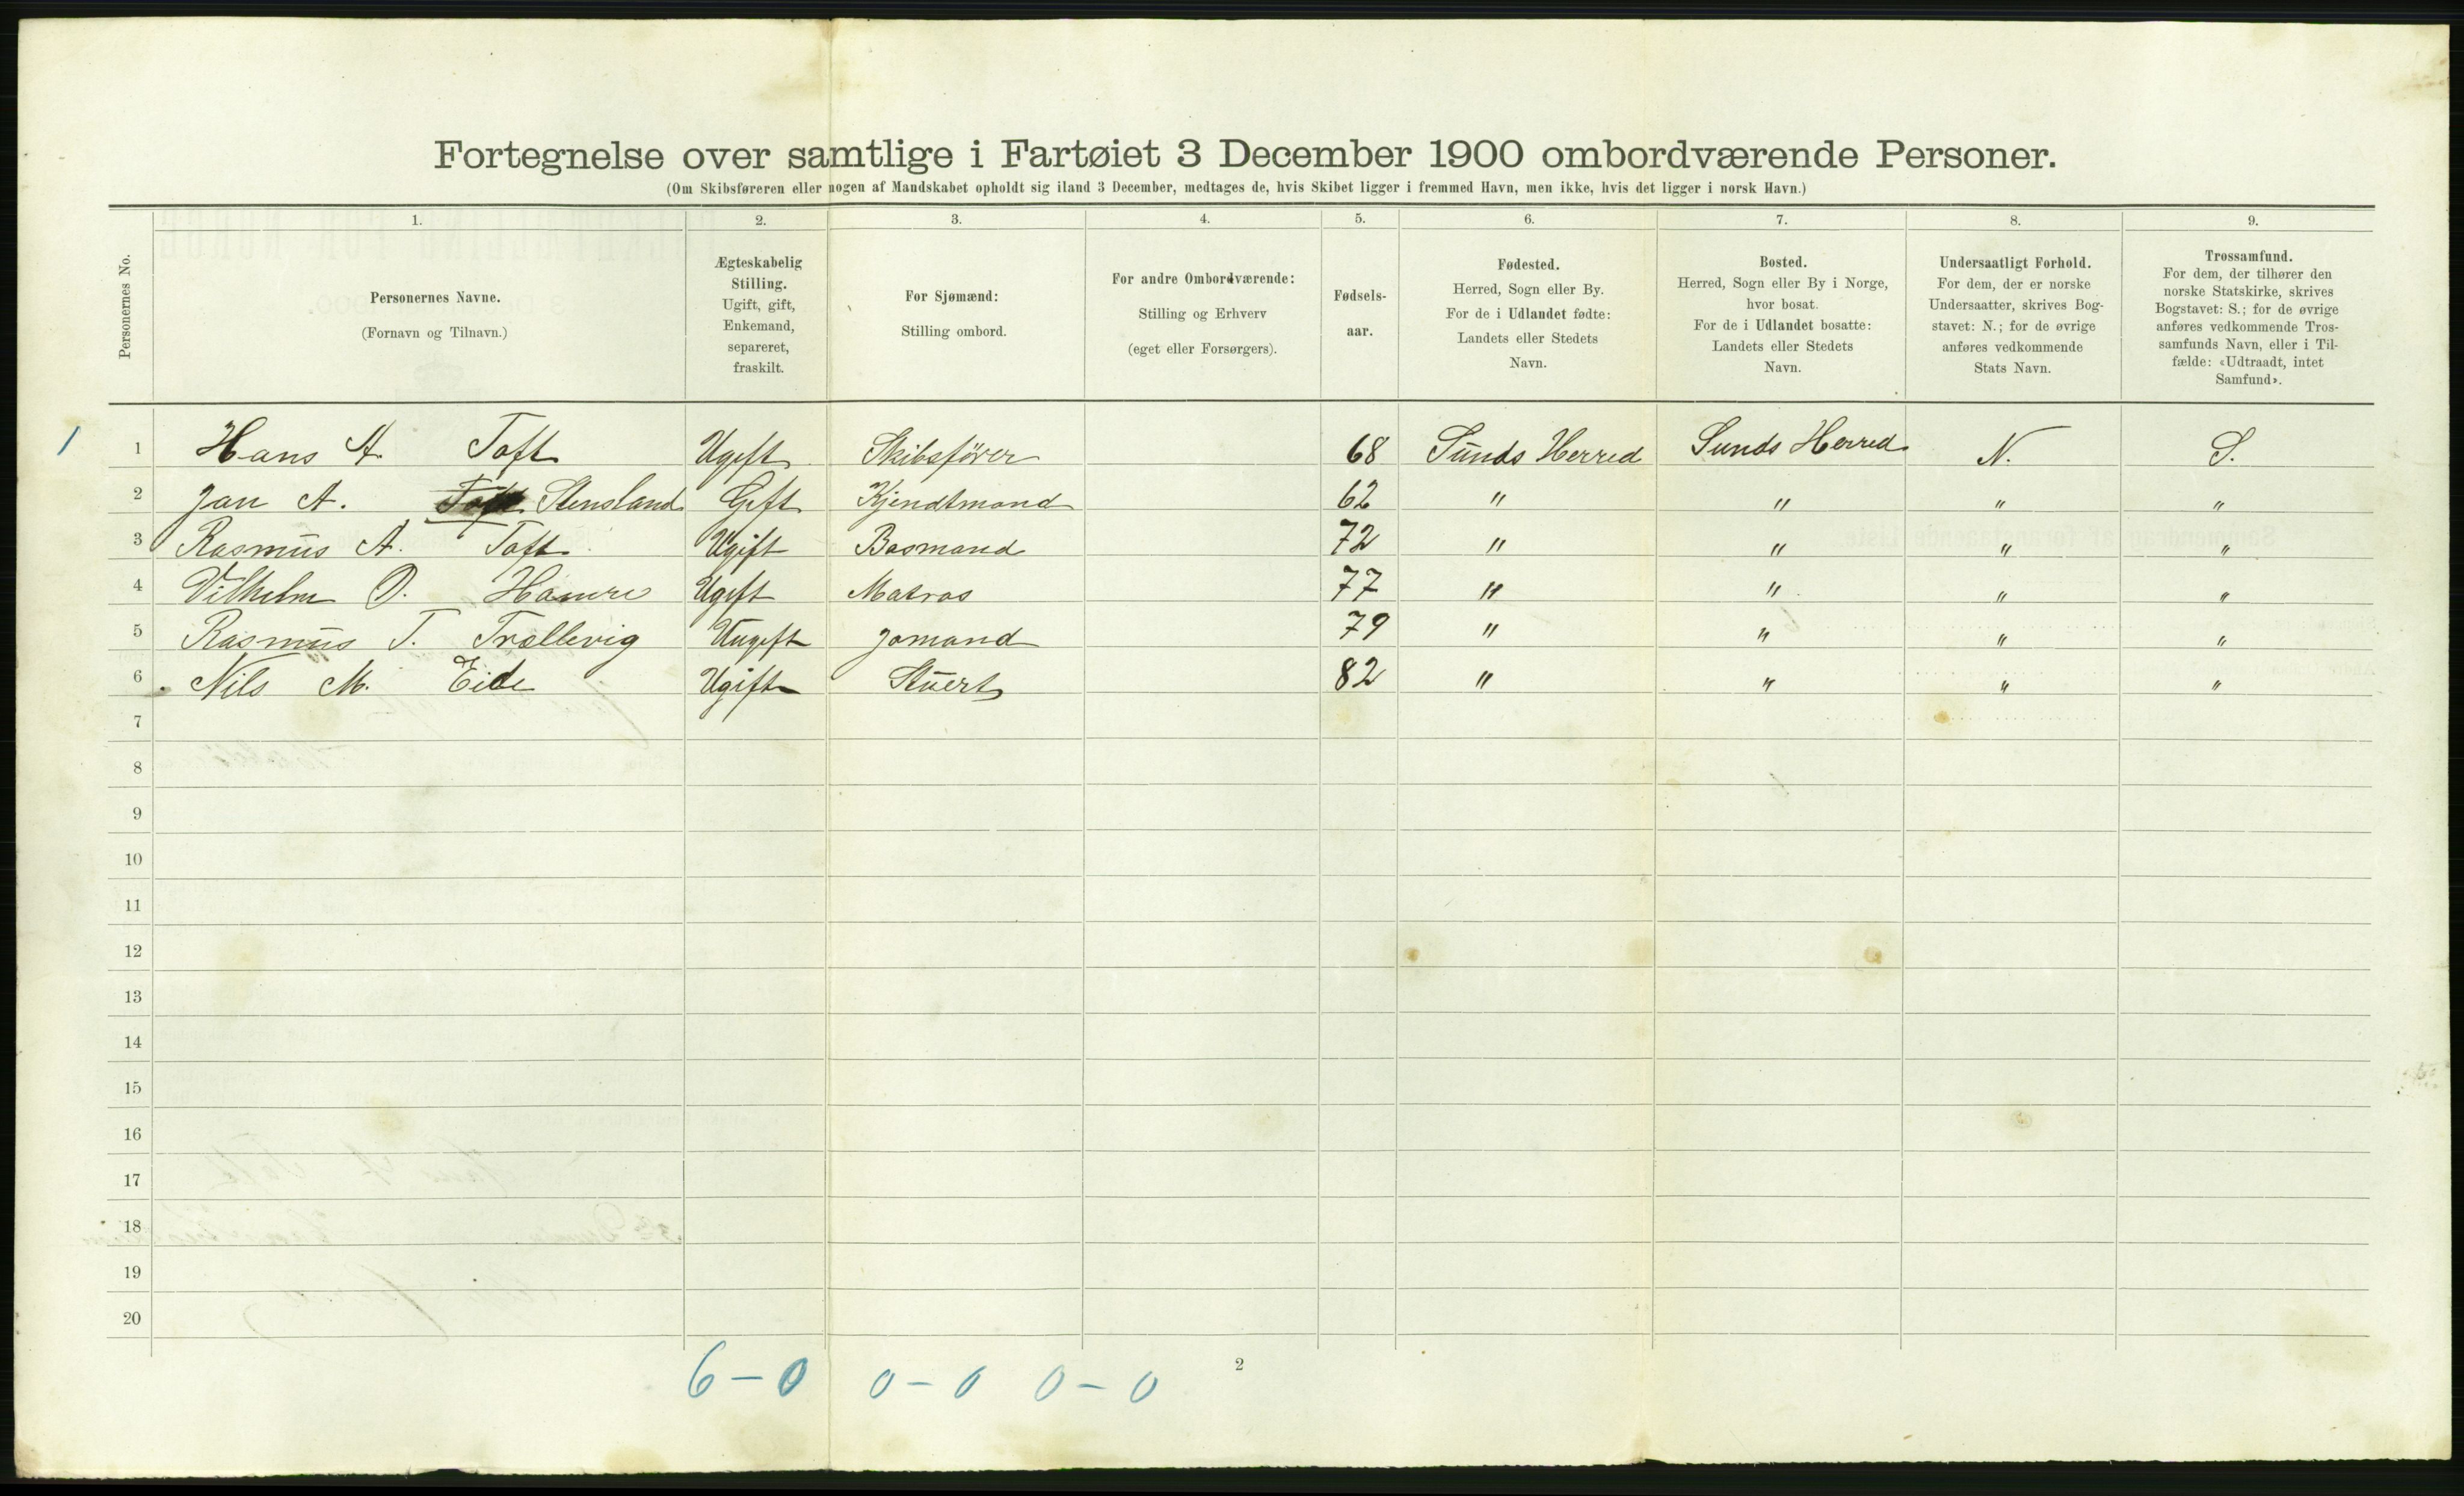 RA, 1900 Census - ship lists from ships in Norwegian harbours, harbours abroad and at sea, 1900, p. 1490